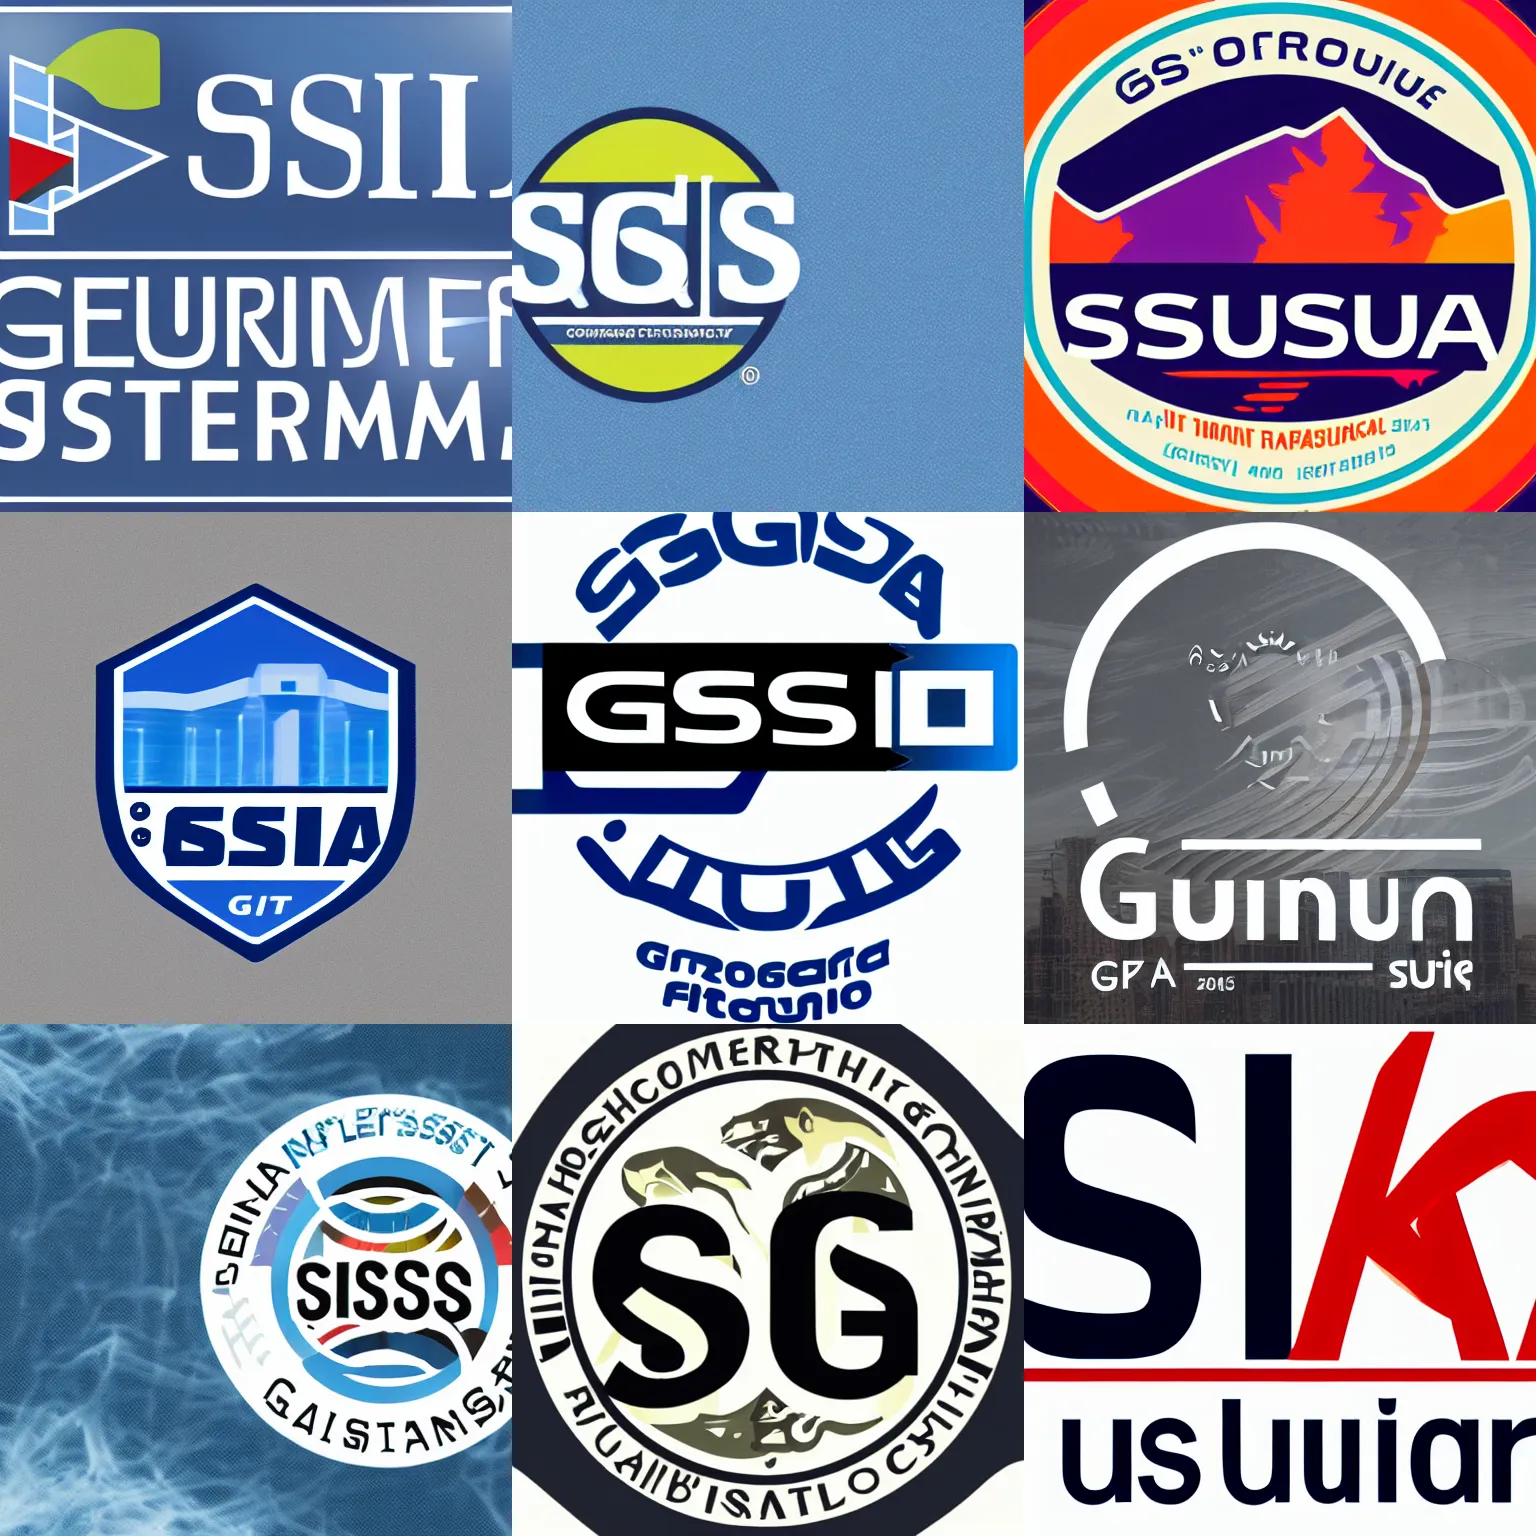 Prompt: a logo of Gsiurbsa, the company of the future